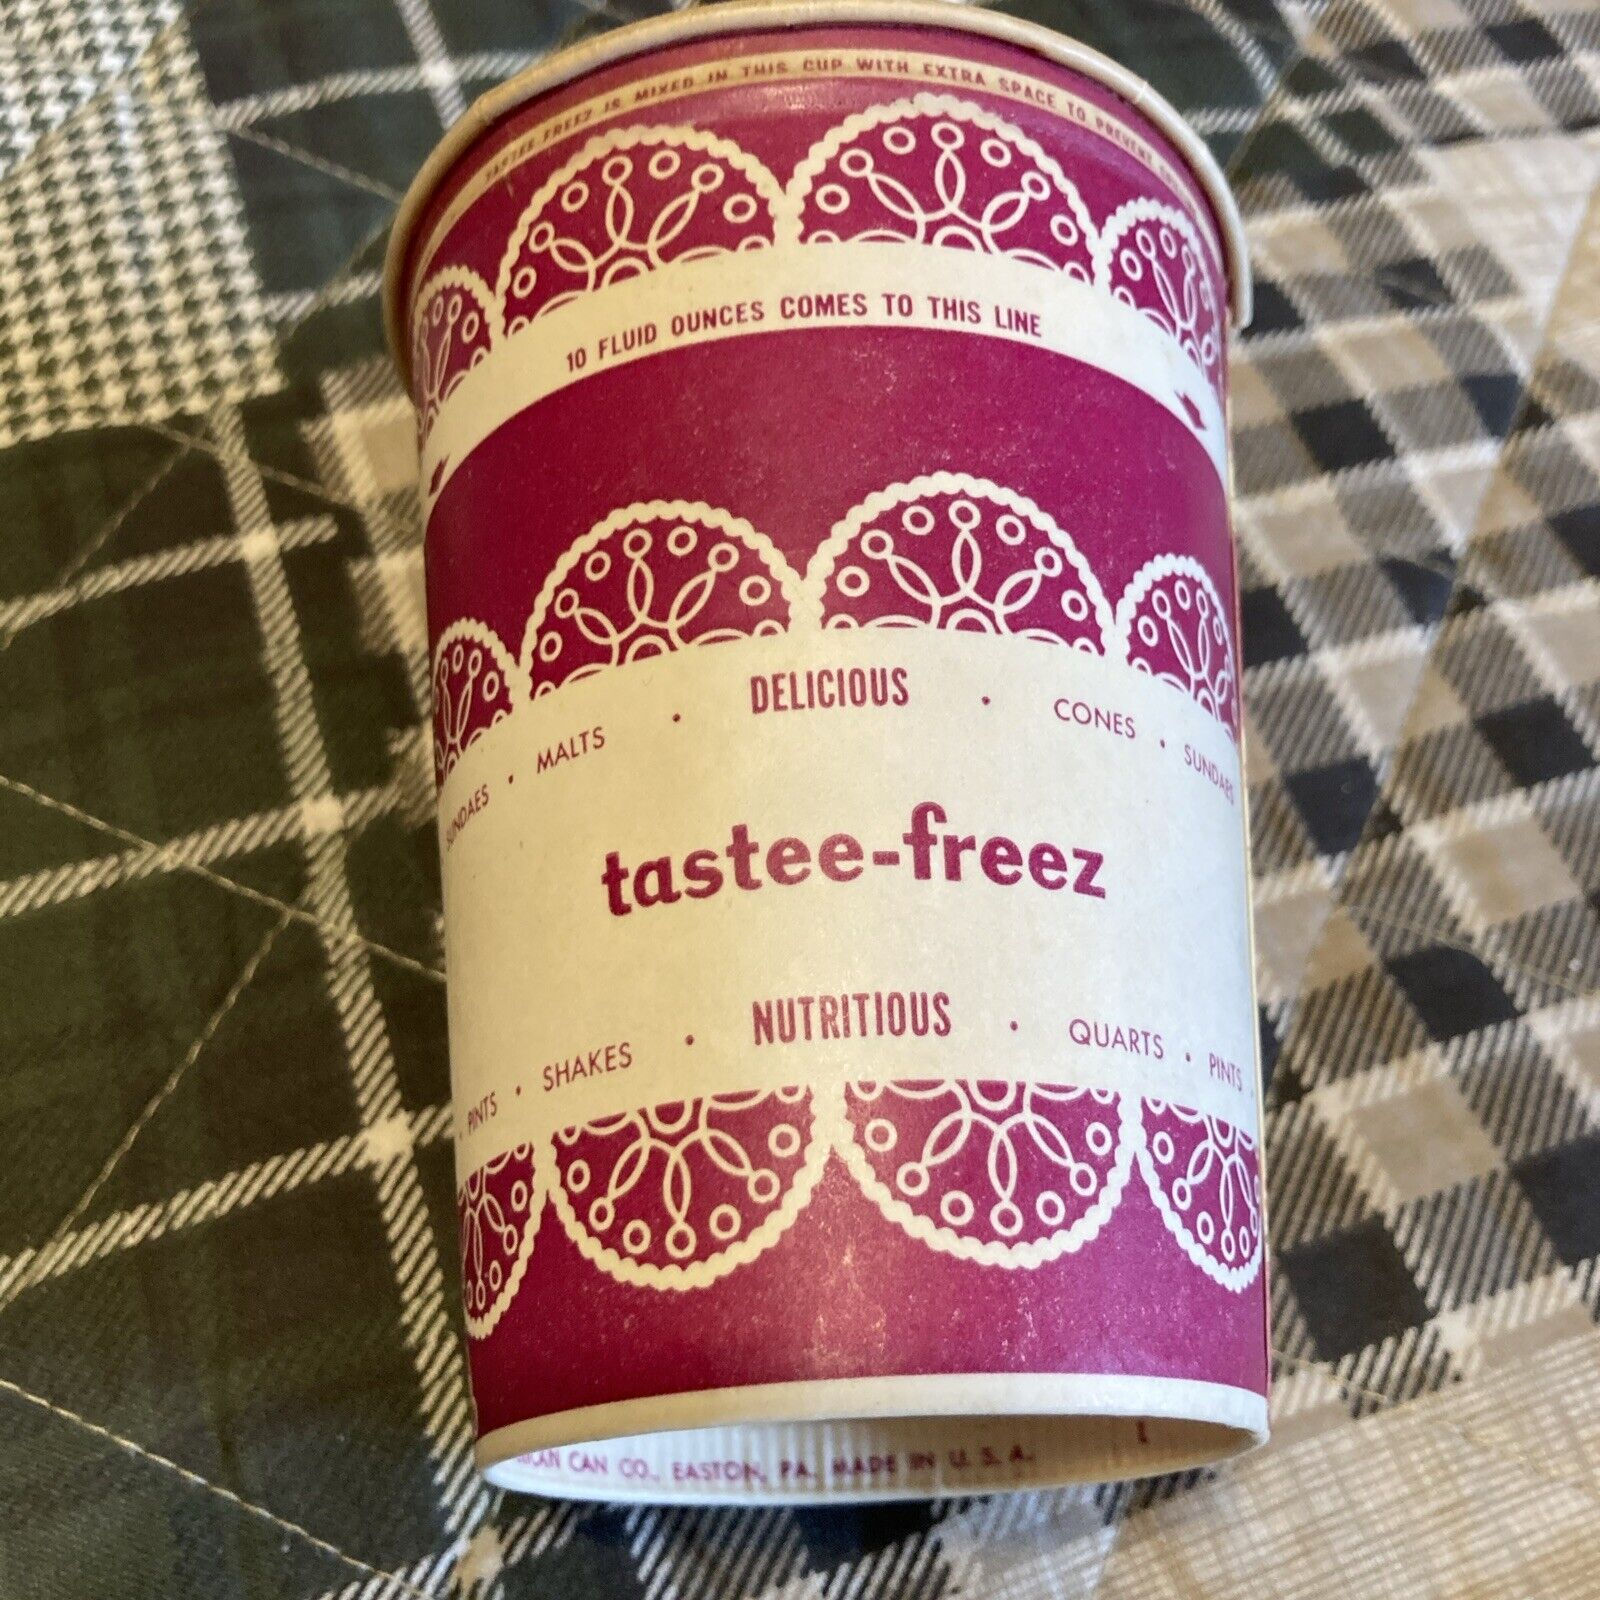 VINTAGE Wax Paper Cup tastee-freez Cup 1960s Ice Cream Cup Drive In Restaurant